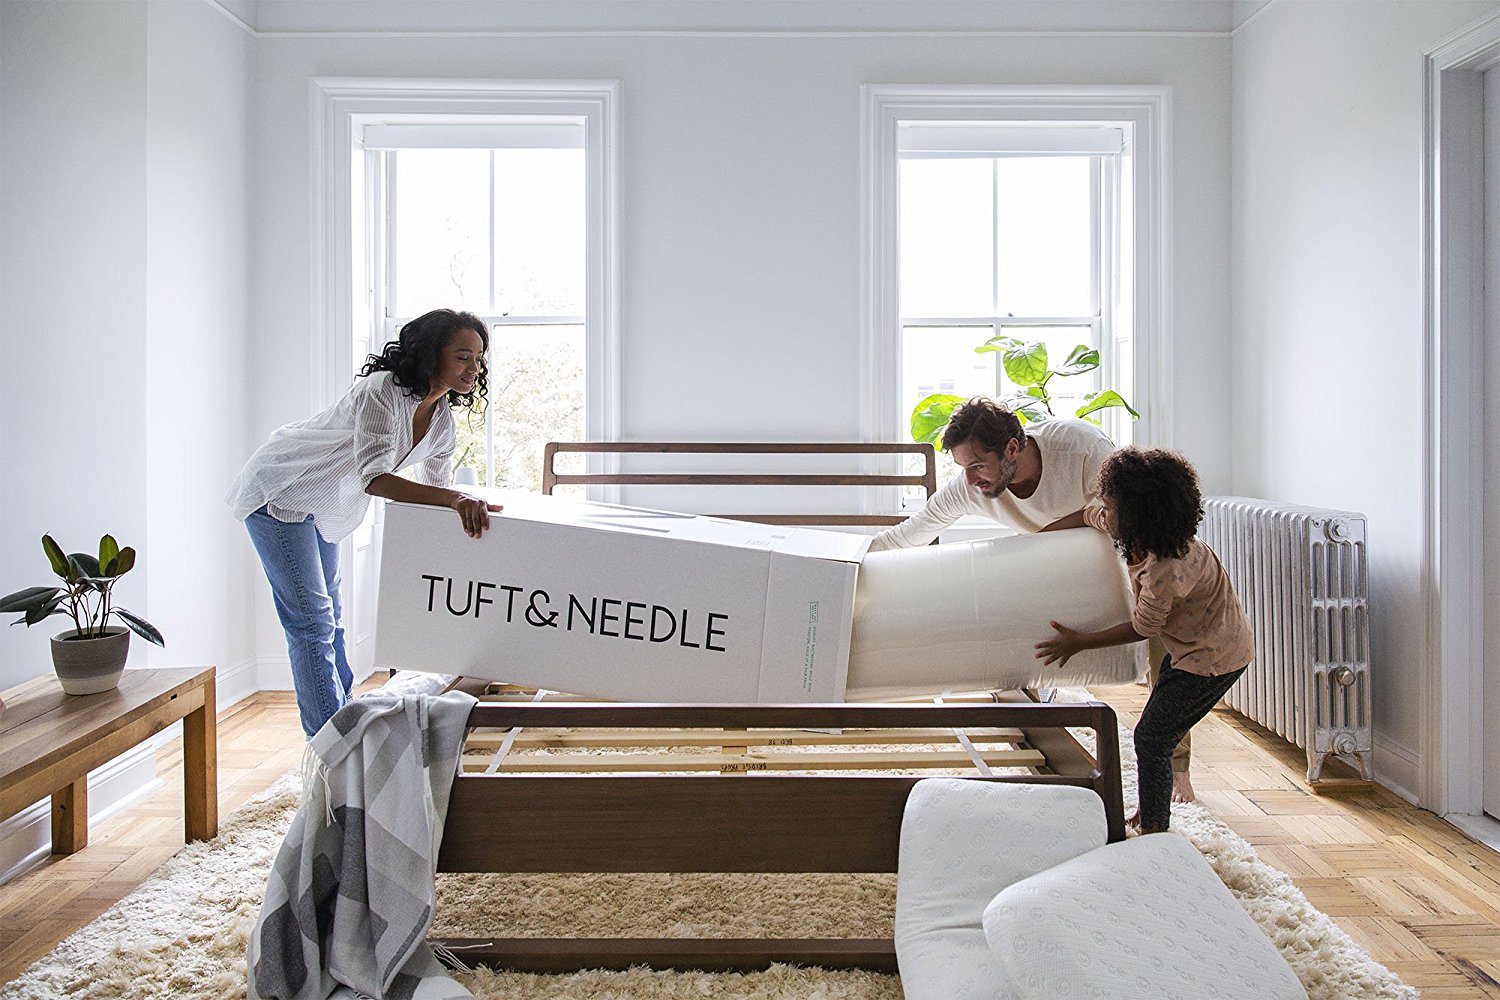 Tuft and Needle (T&N)